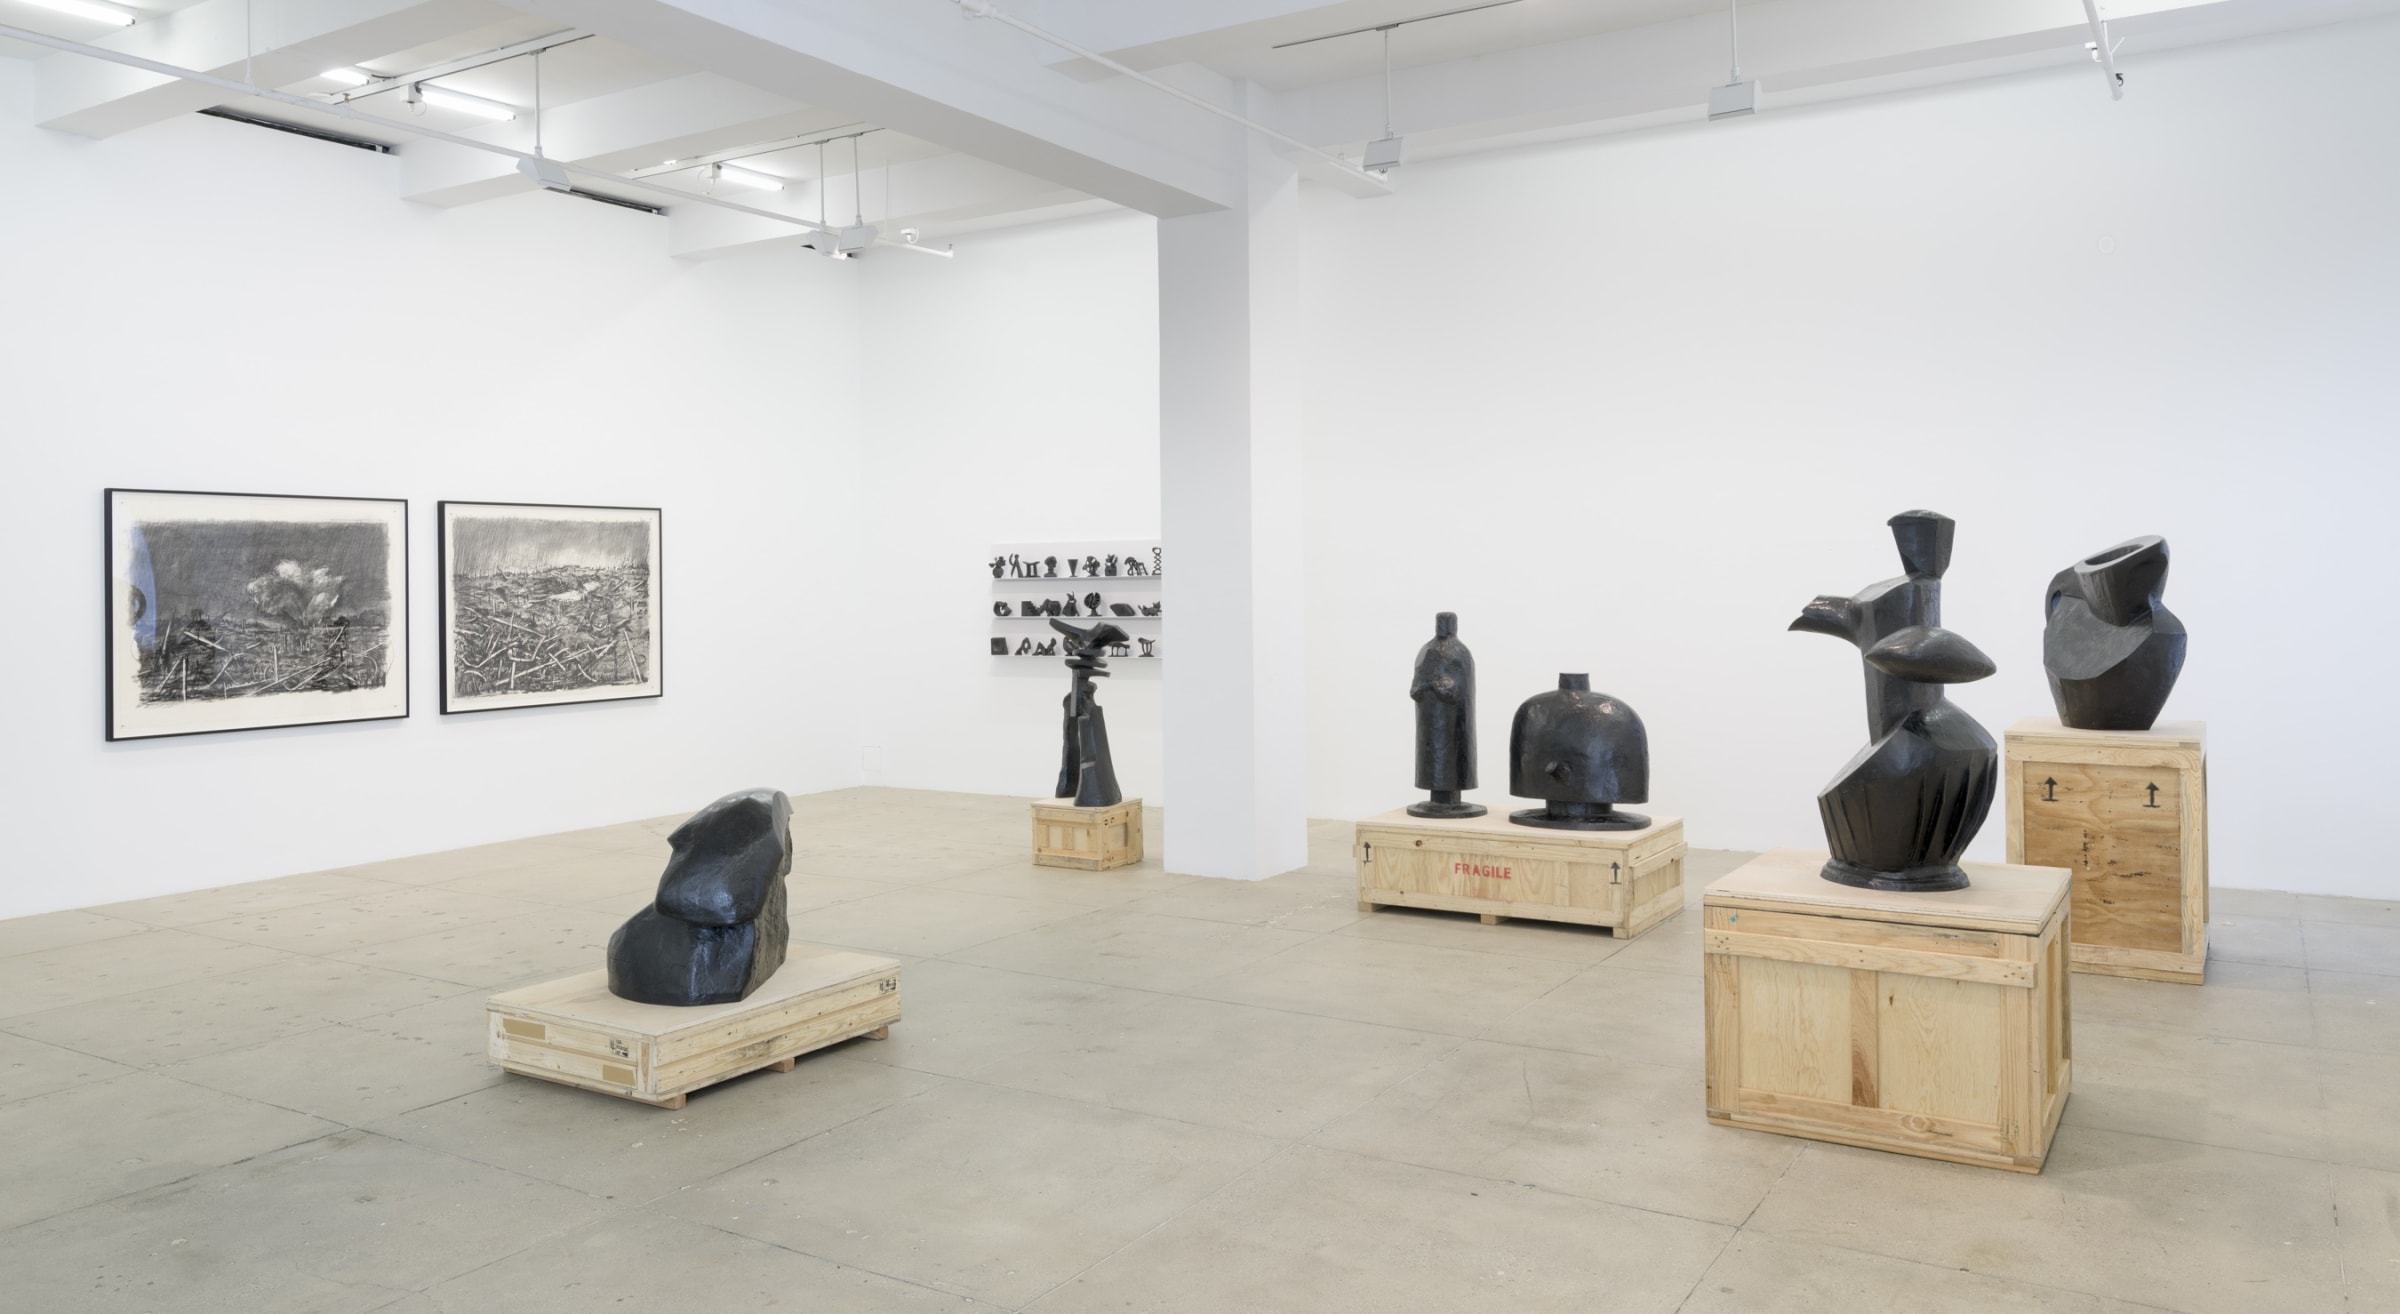 Five large copper sculptures of various figures including vases, men and women, stand next to two dark graphite drawings of war-torn landscapes. 